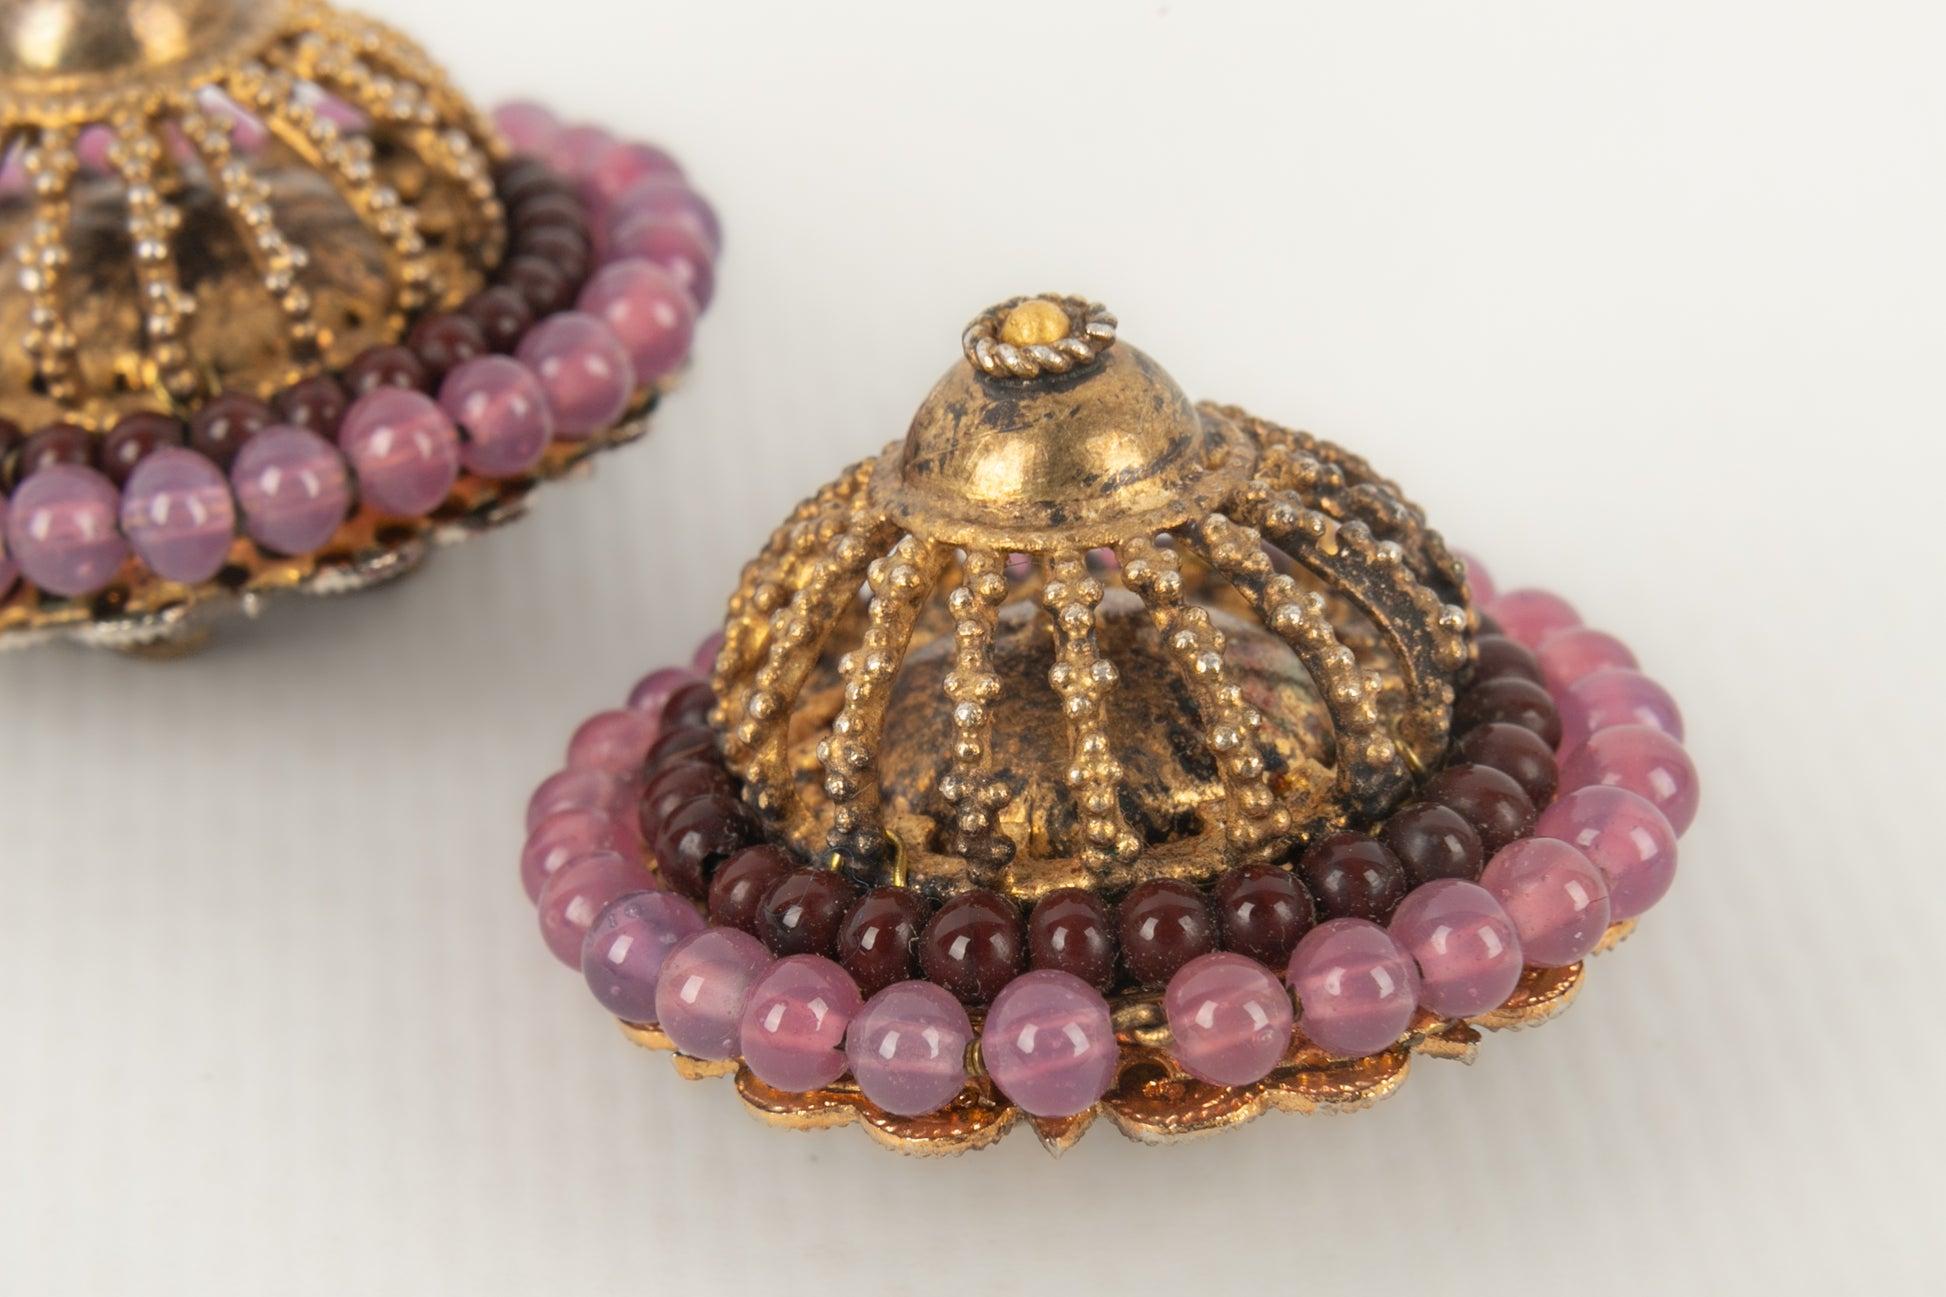 Chanel - Golden metal earrings with two pink and plum glass pearl rows. Haute Couture jewelry from the Coco era and designed by the Rousselet atelier.

Additional information:
Condition: Very good condition
Dimensions: Diameter: 3 cm

Seller